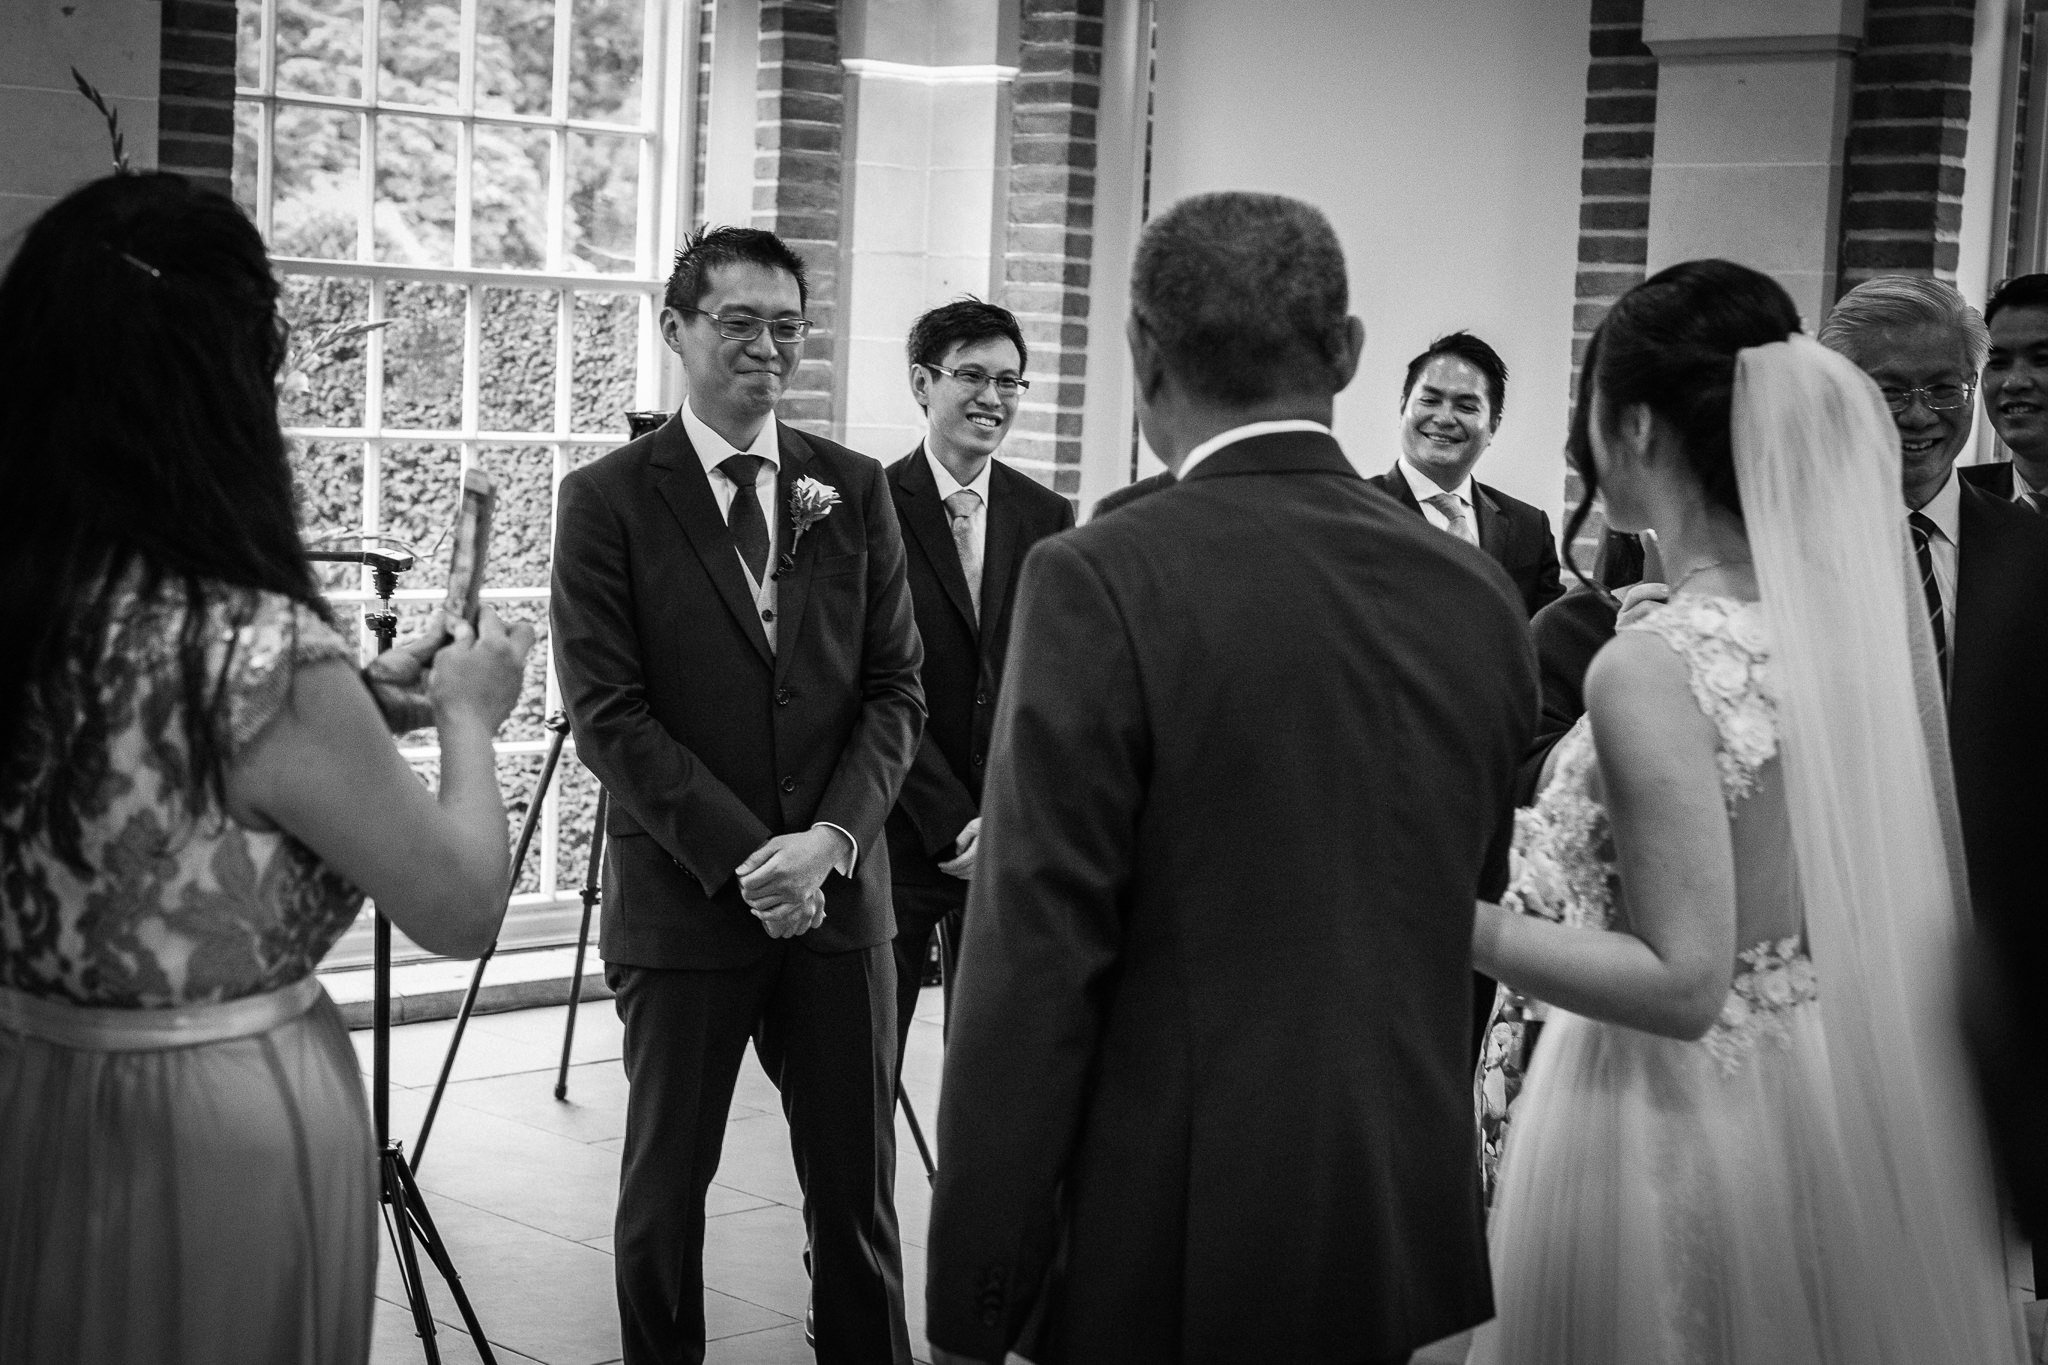  Groom see’s the Bride for the first time on their wedding day 